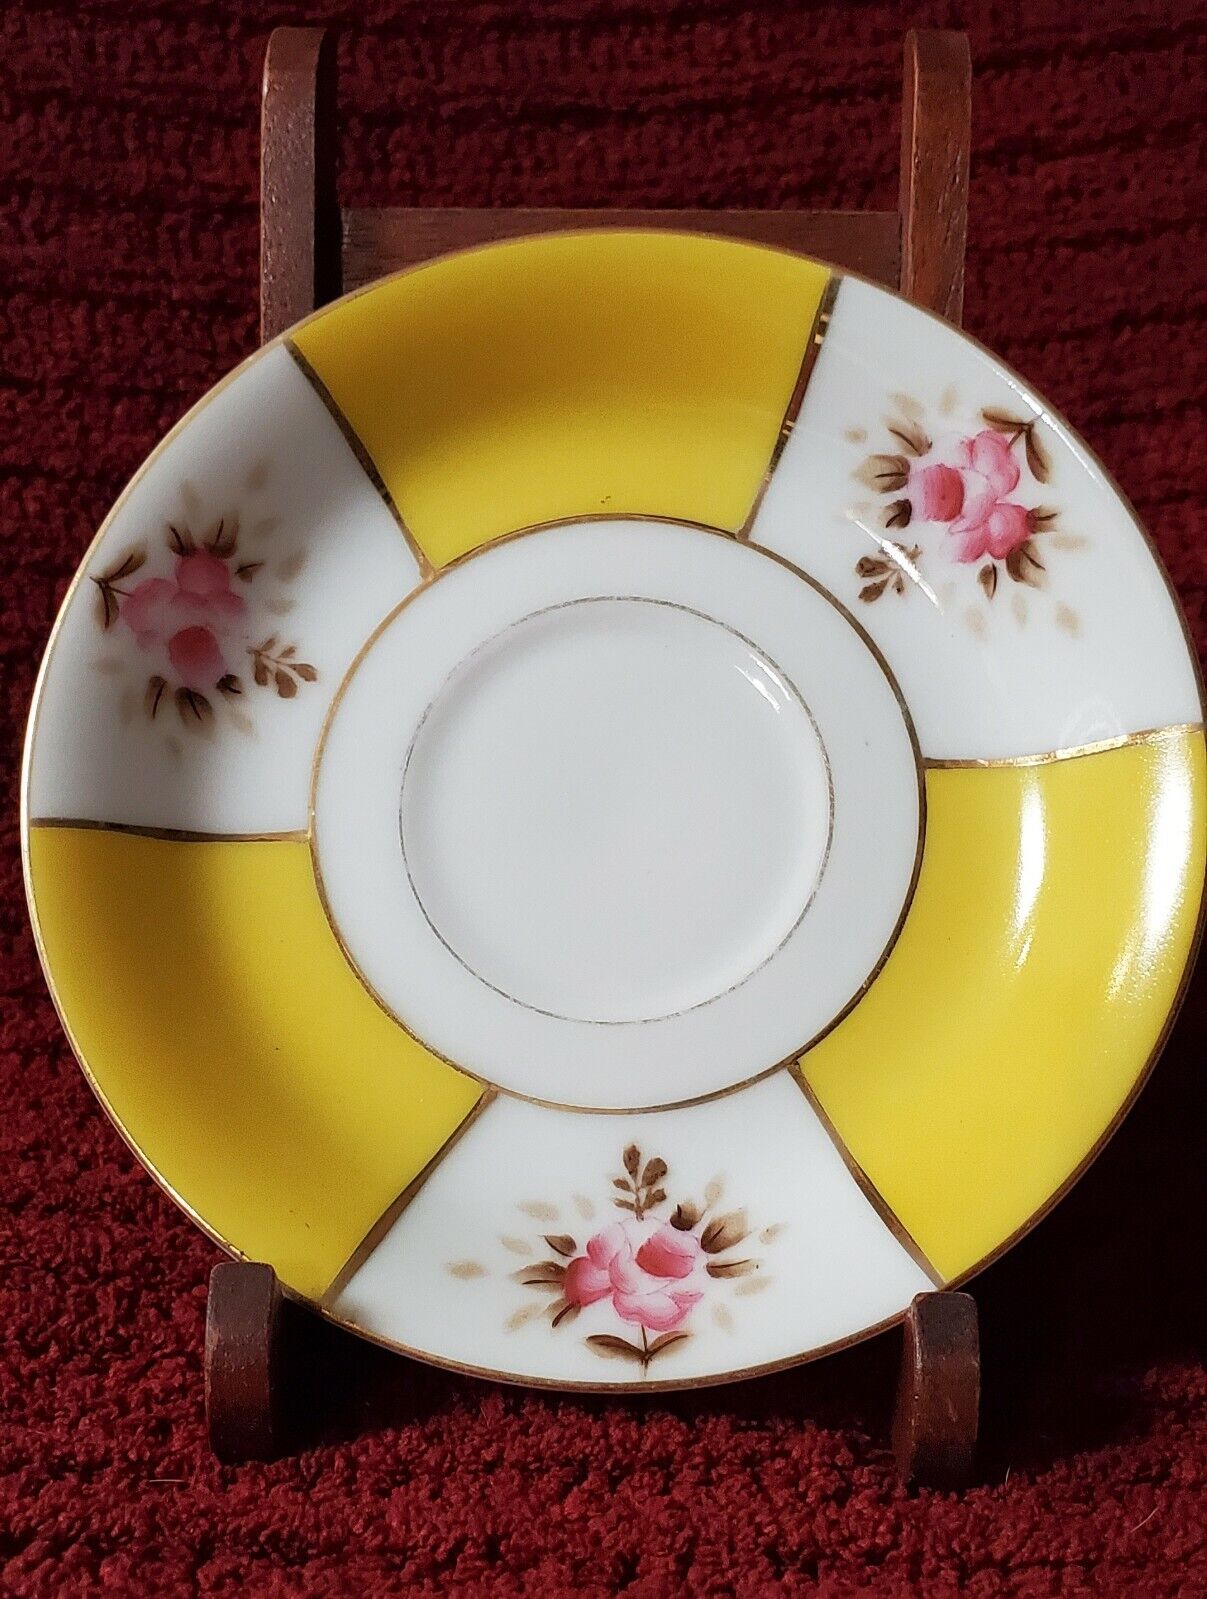 Made in Occupied Japan Ucagco China Demitasse Saucer Gold Trim Yellow Vintage